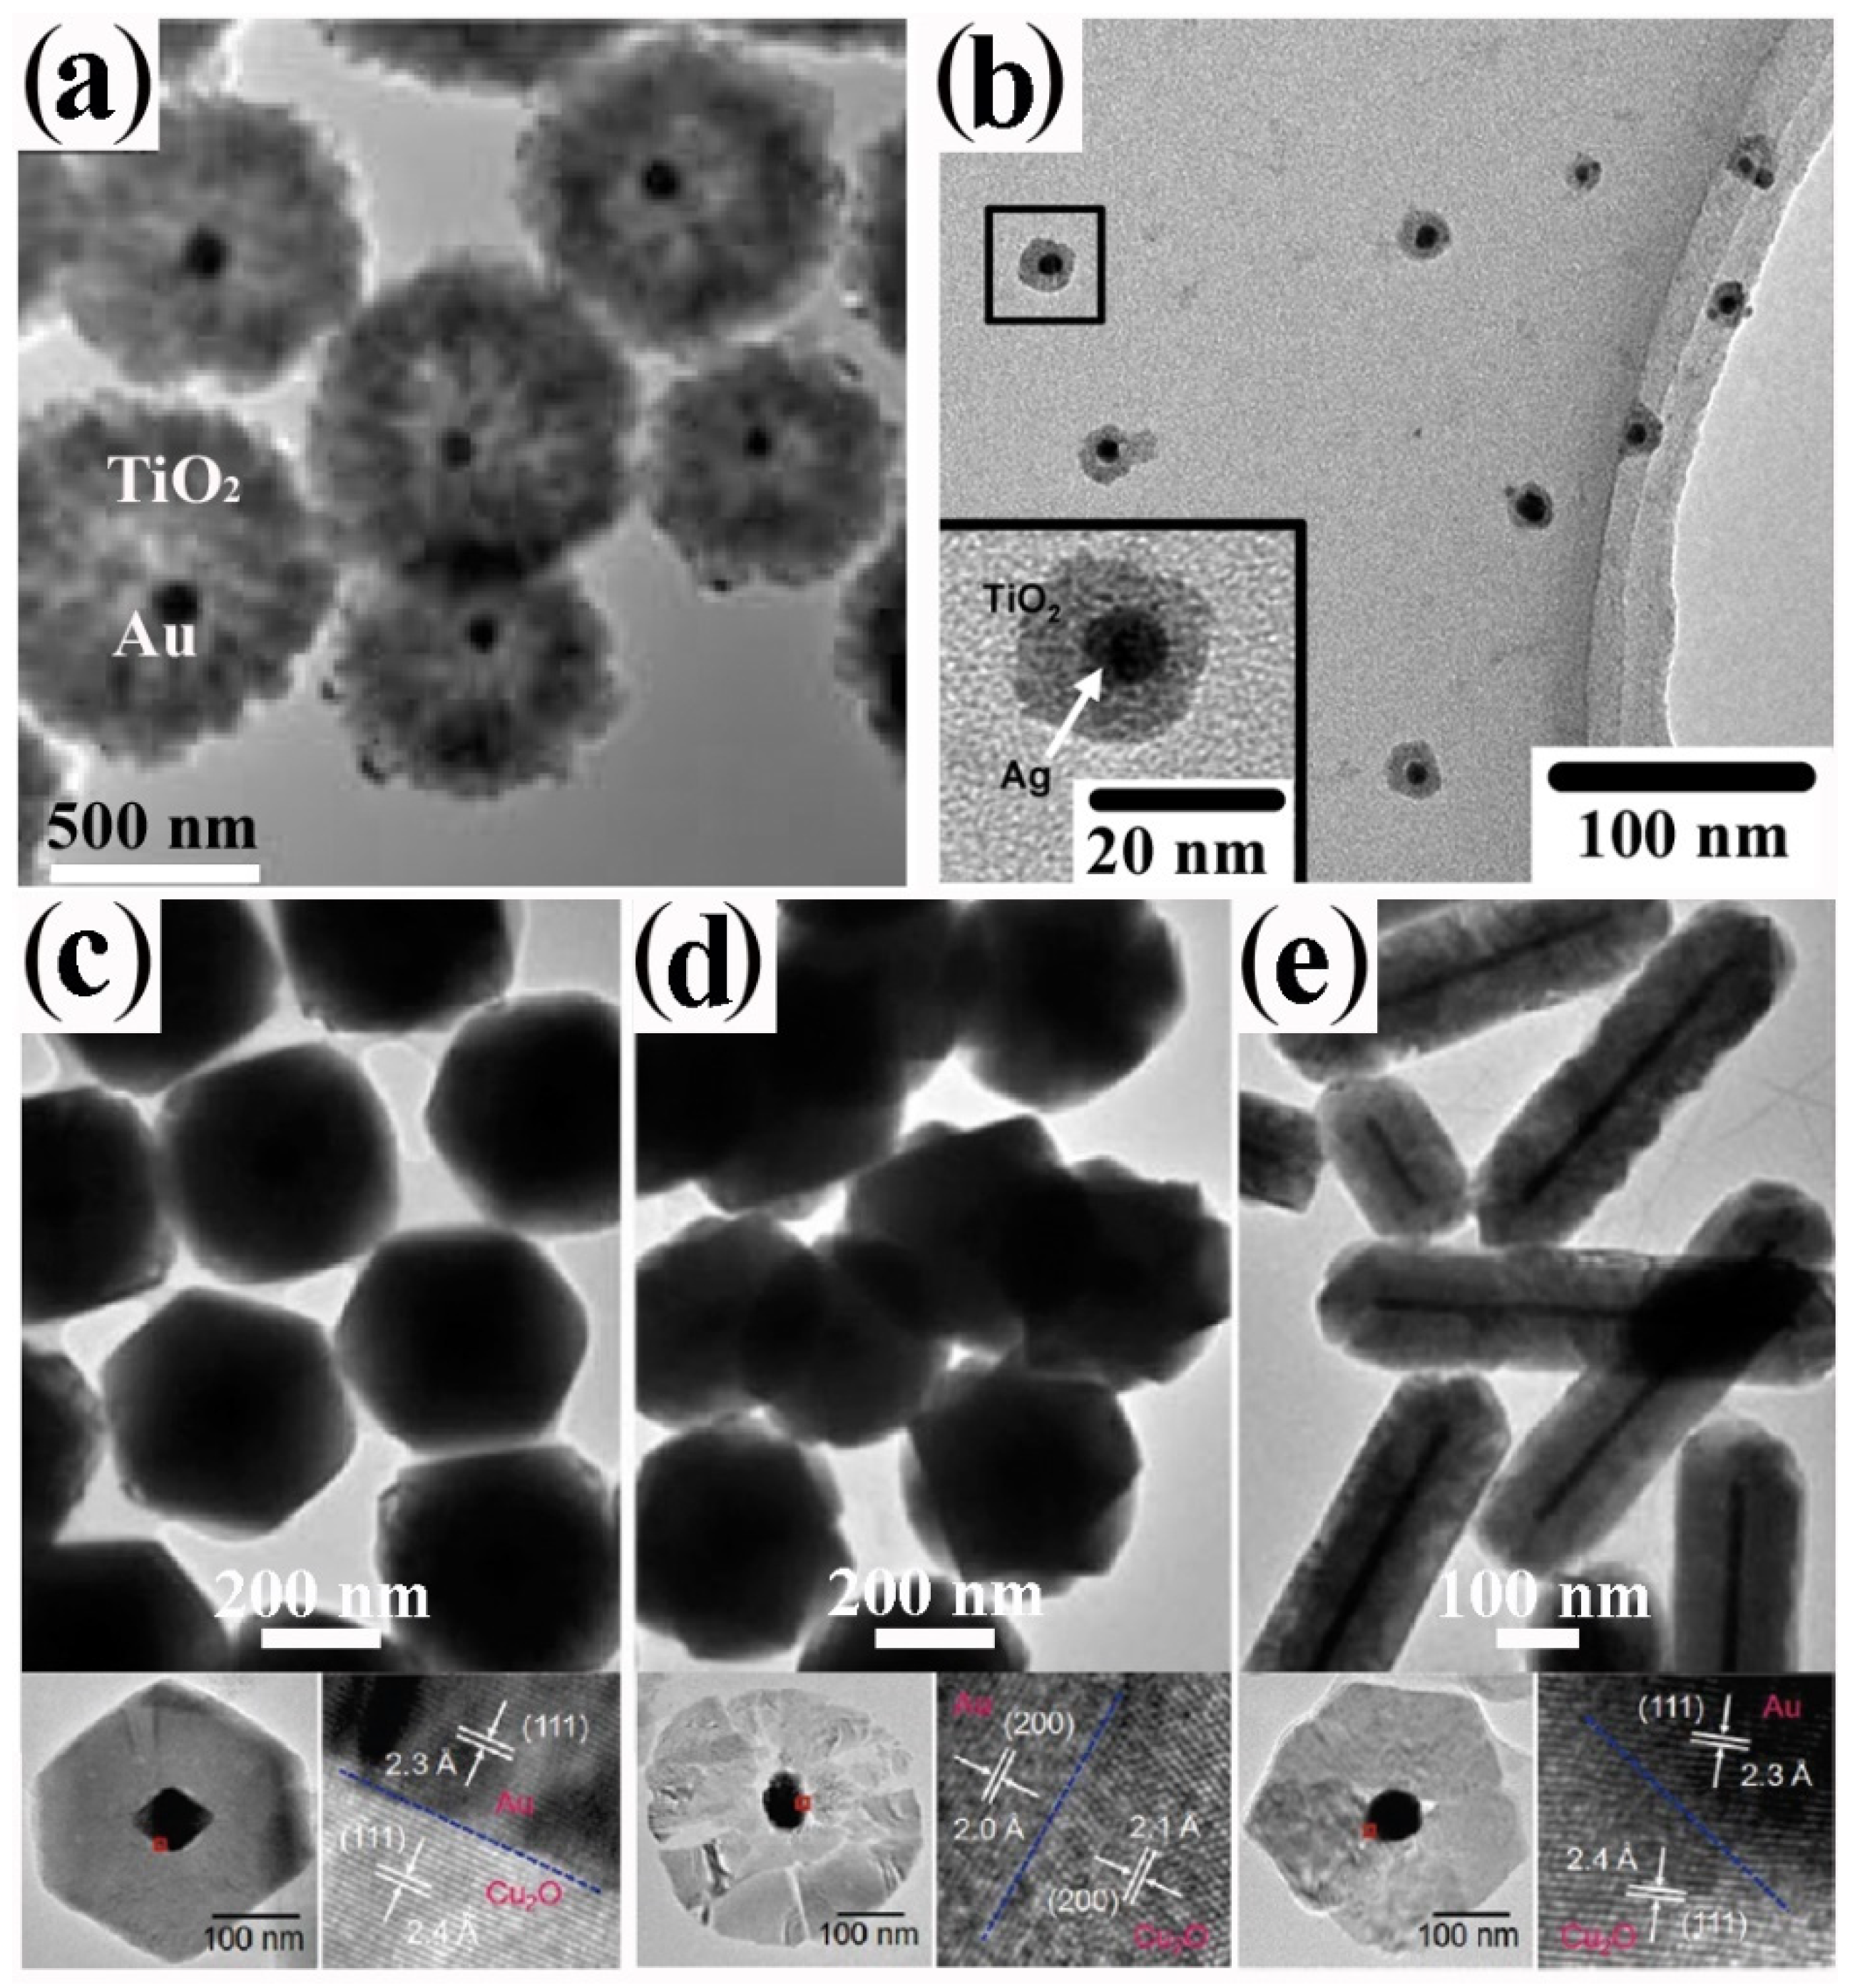 Seed‐Mediated Growth of Colloidal Metal Nanocrystals - Xia - 2017 -  Angewandte Chemie International Edition - Wiley Online Library